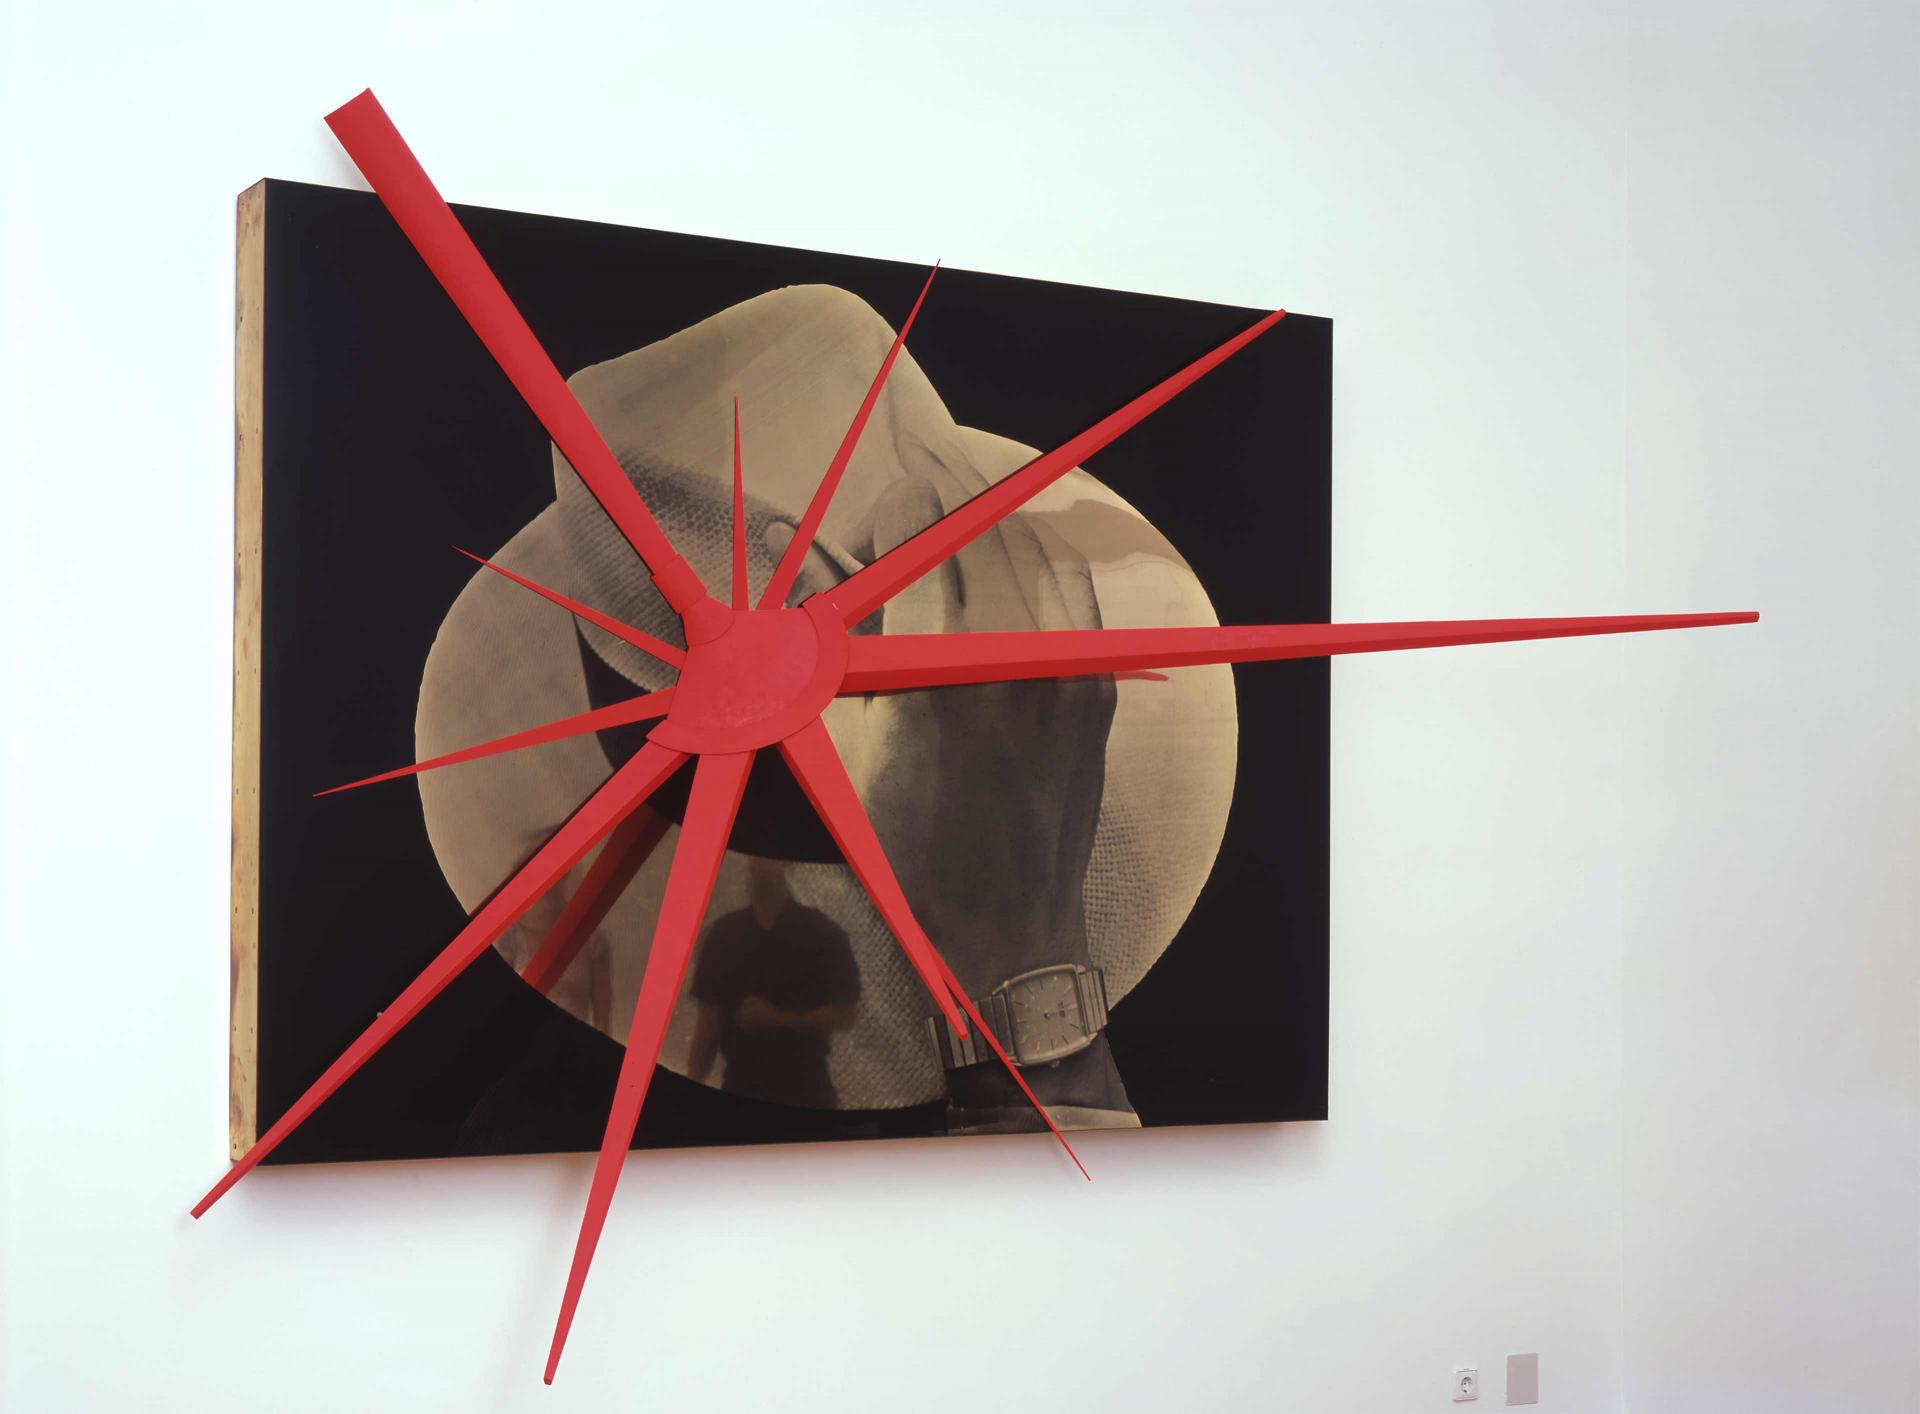 The large-scale artwork shows a highly magnified photo of a hat and a hand about to lift the hat. On the photo is mounted a red three-dimensional virus-like object